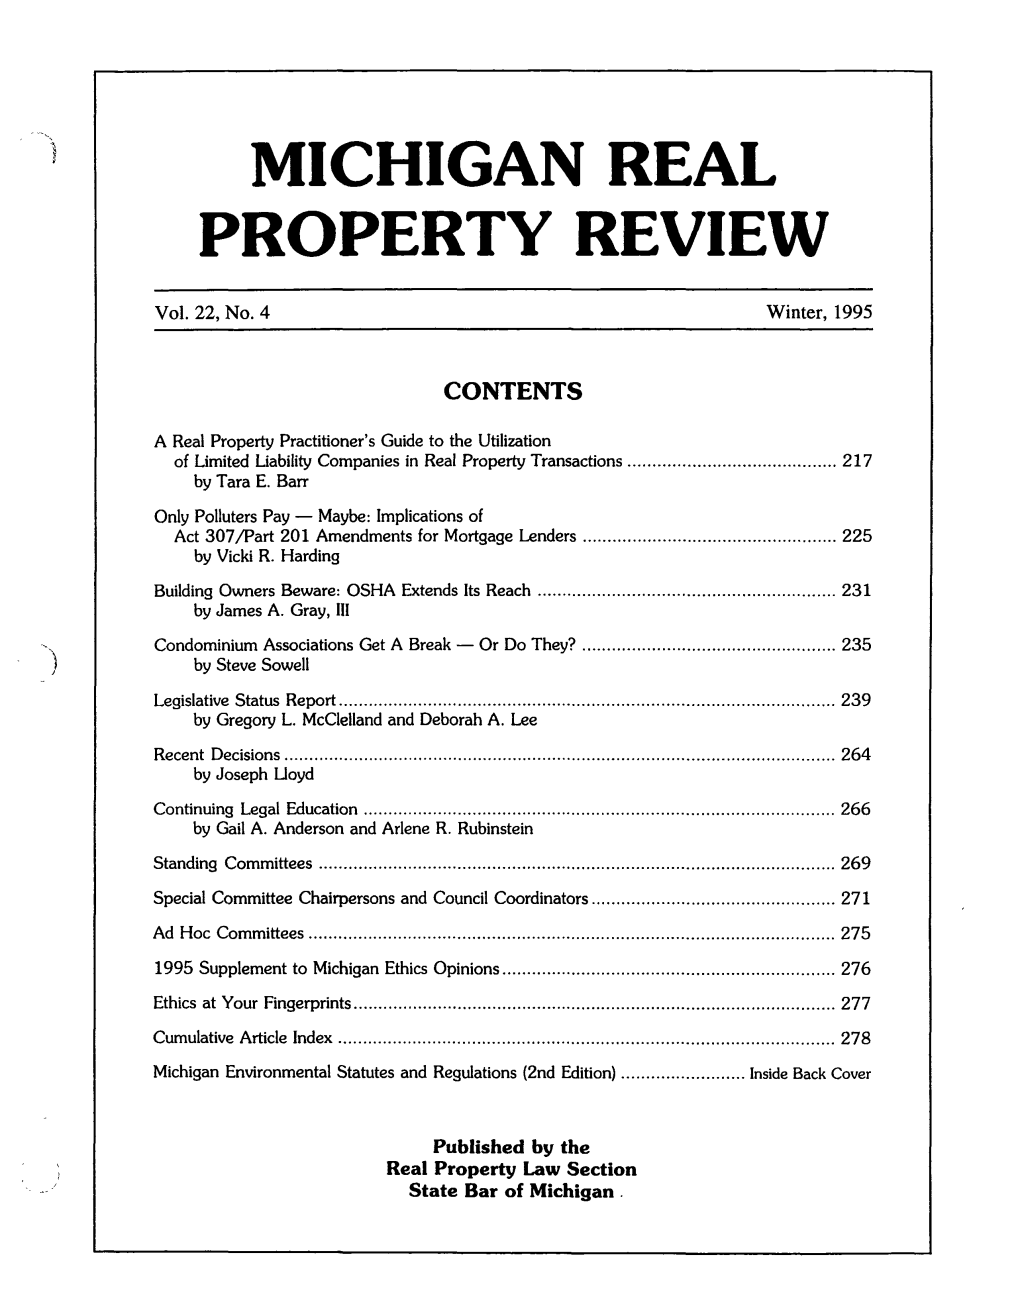 Real Property Law Section of the State Bar of Michigan